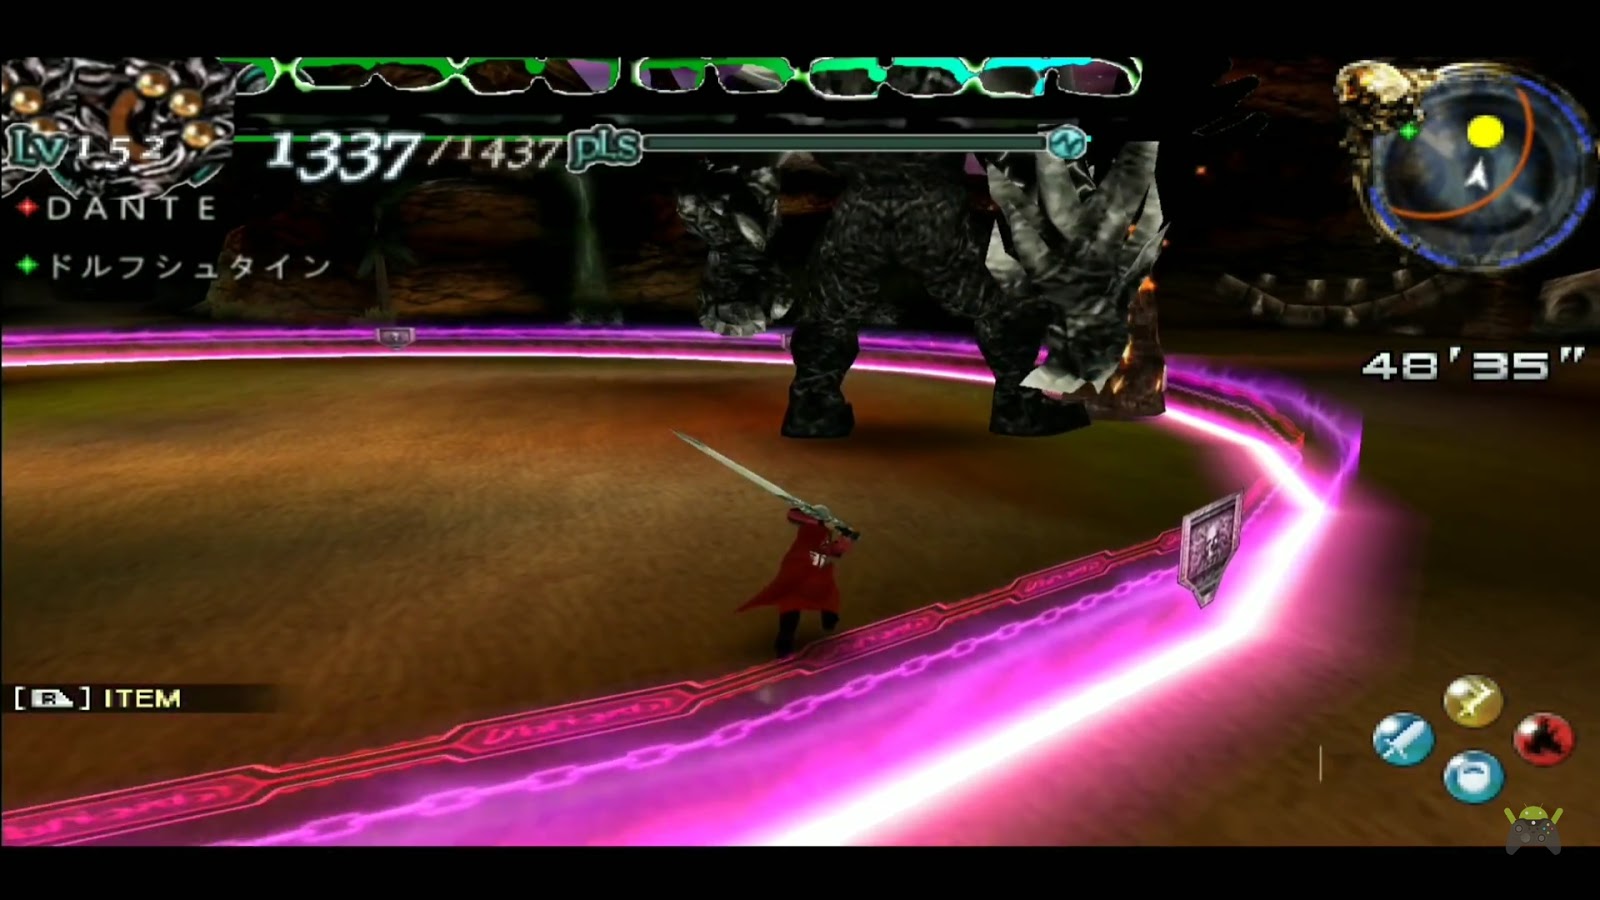 Devil may cry for ppsspp emulator windows 7